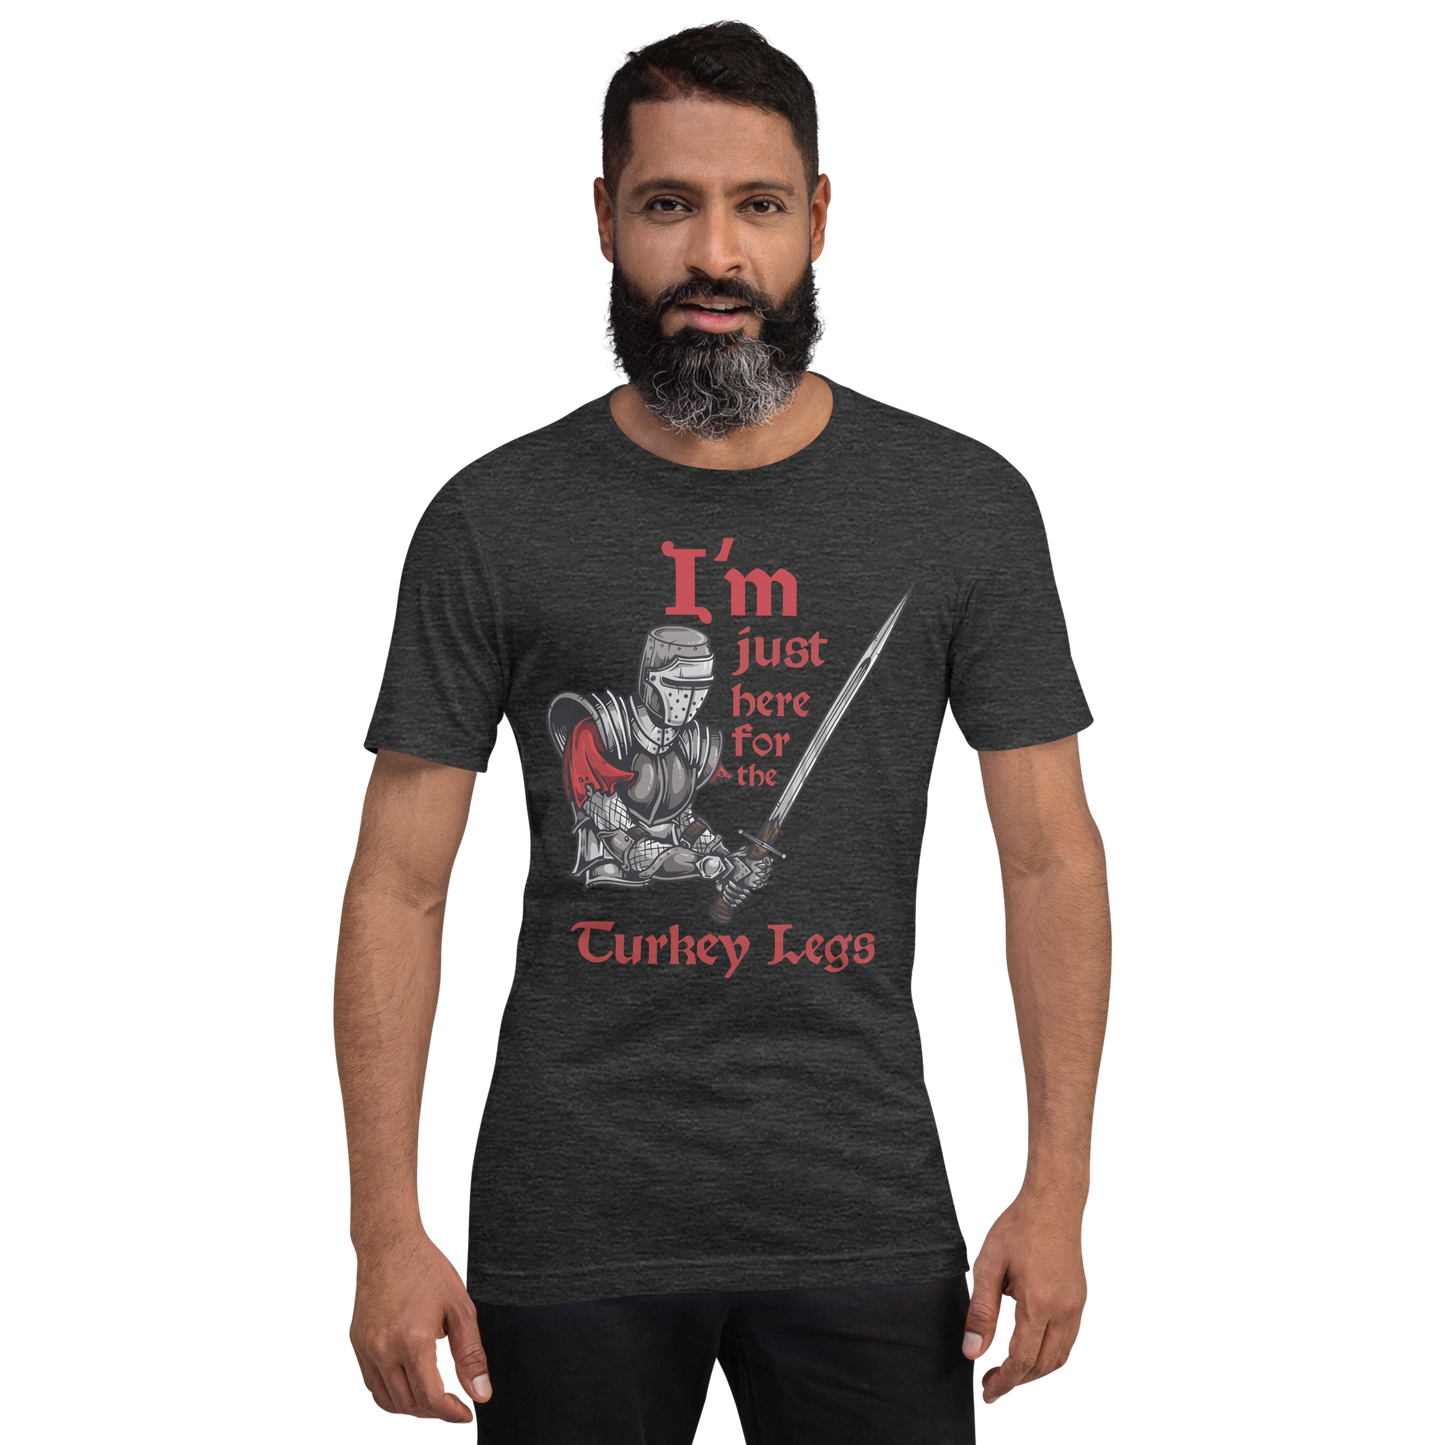 I'm Just here for the Turkey Legs: Unisex t-shirt